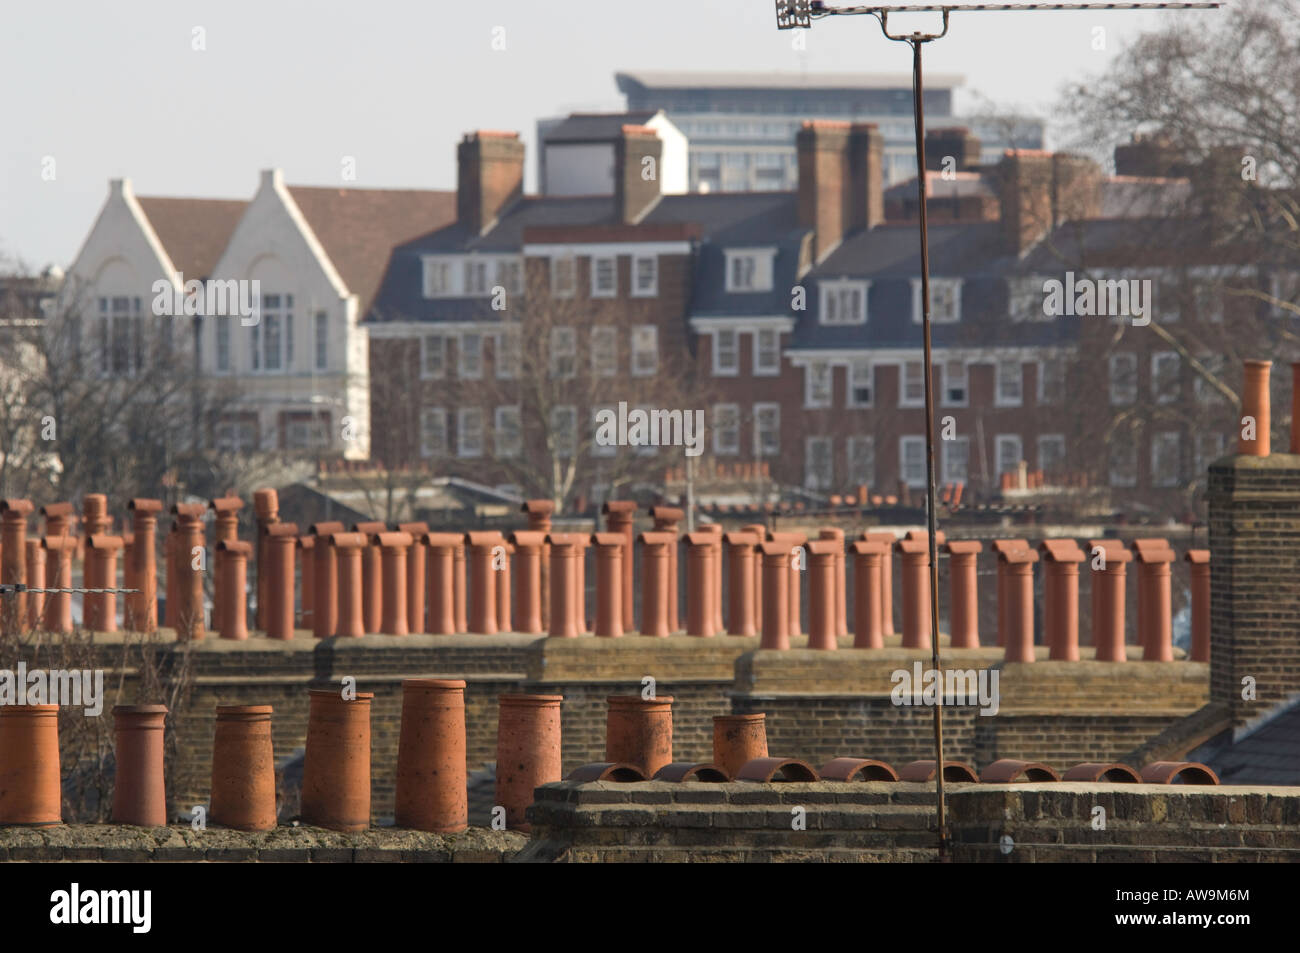 Chimney pots and television aerials in the foreground of a London skyline. Stock Photo